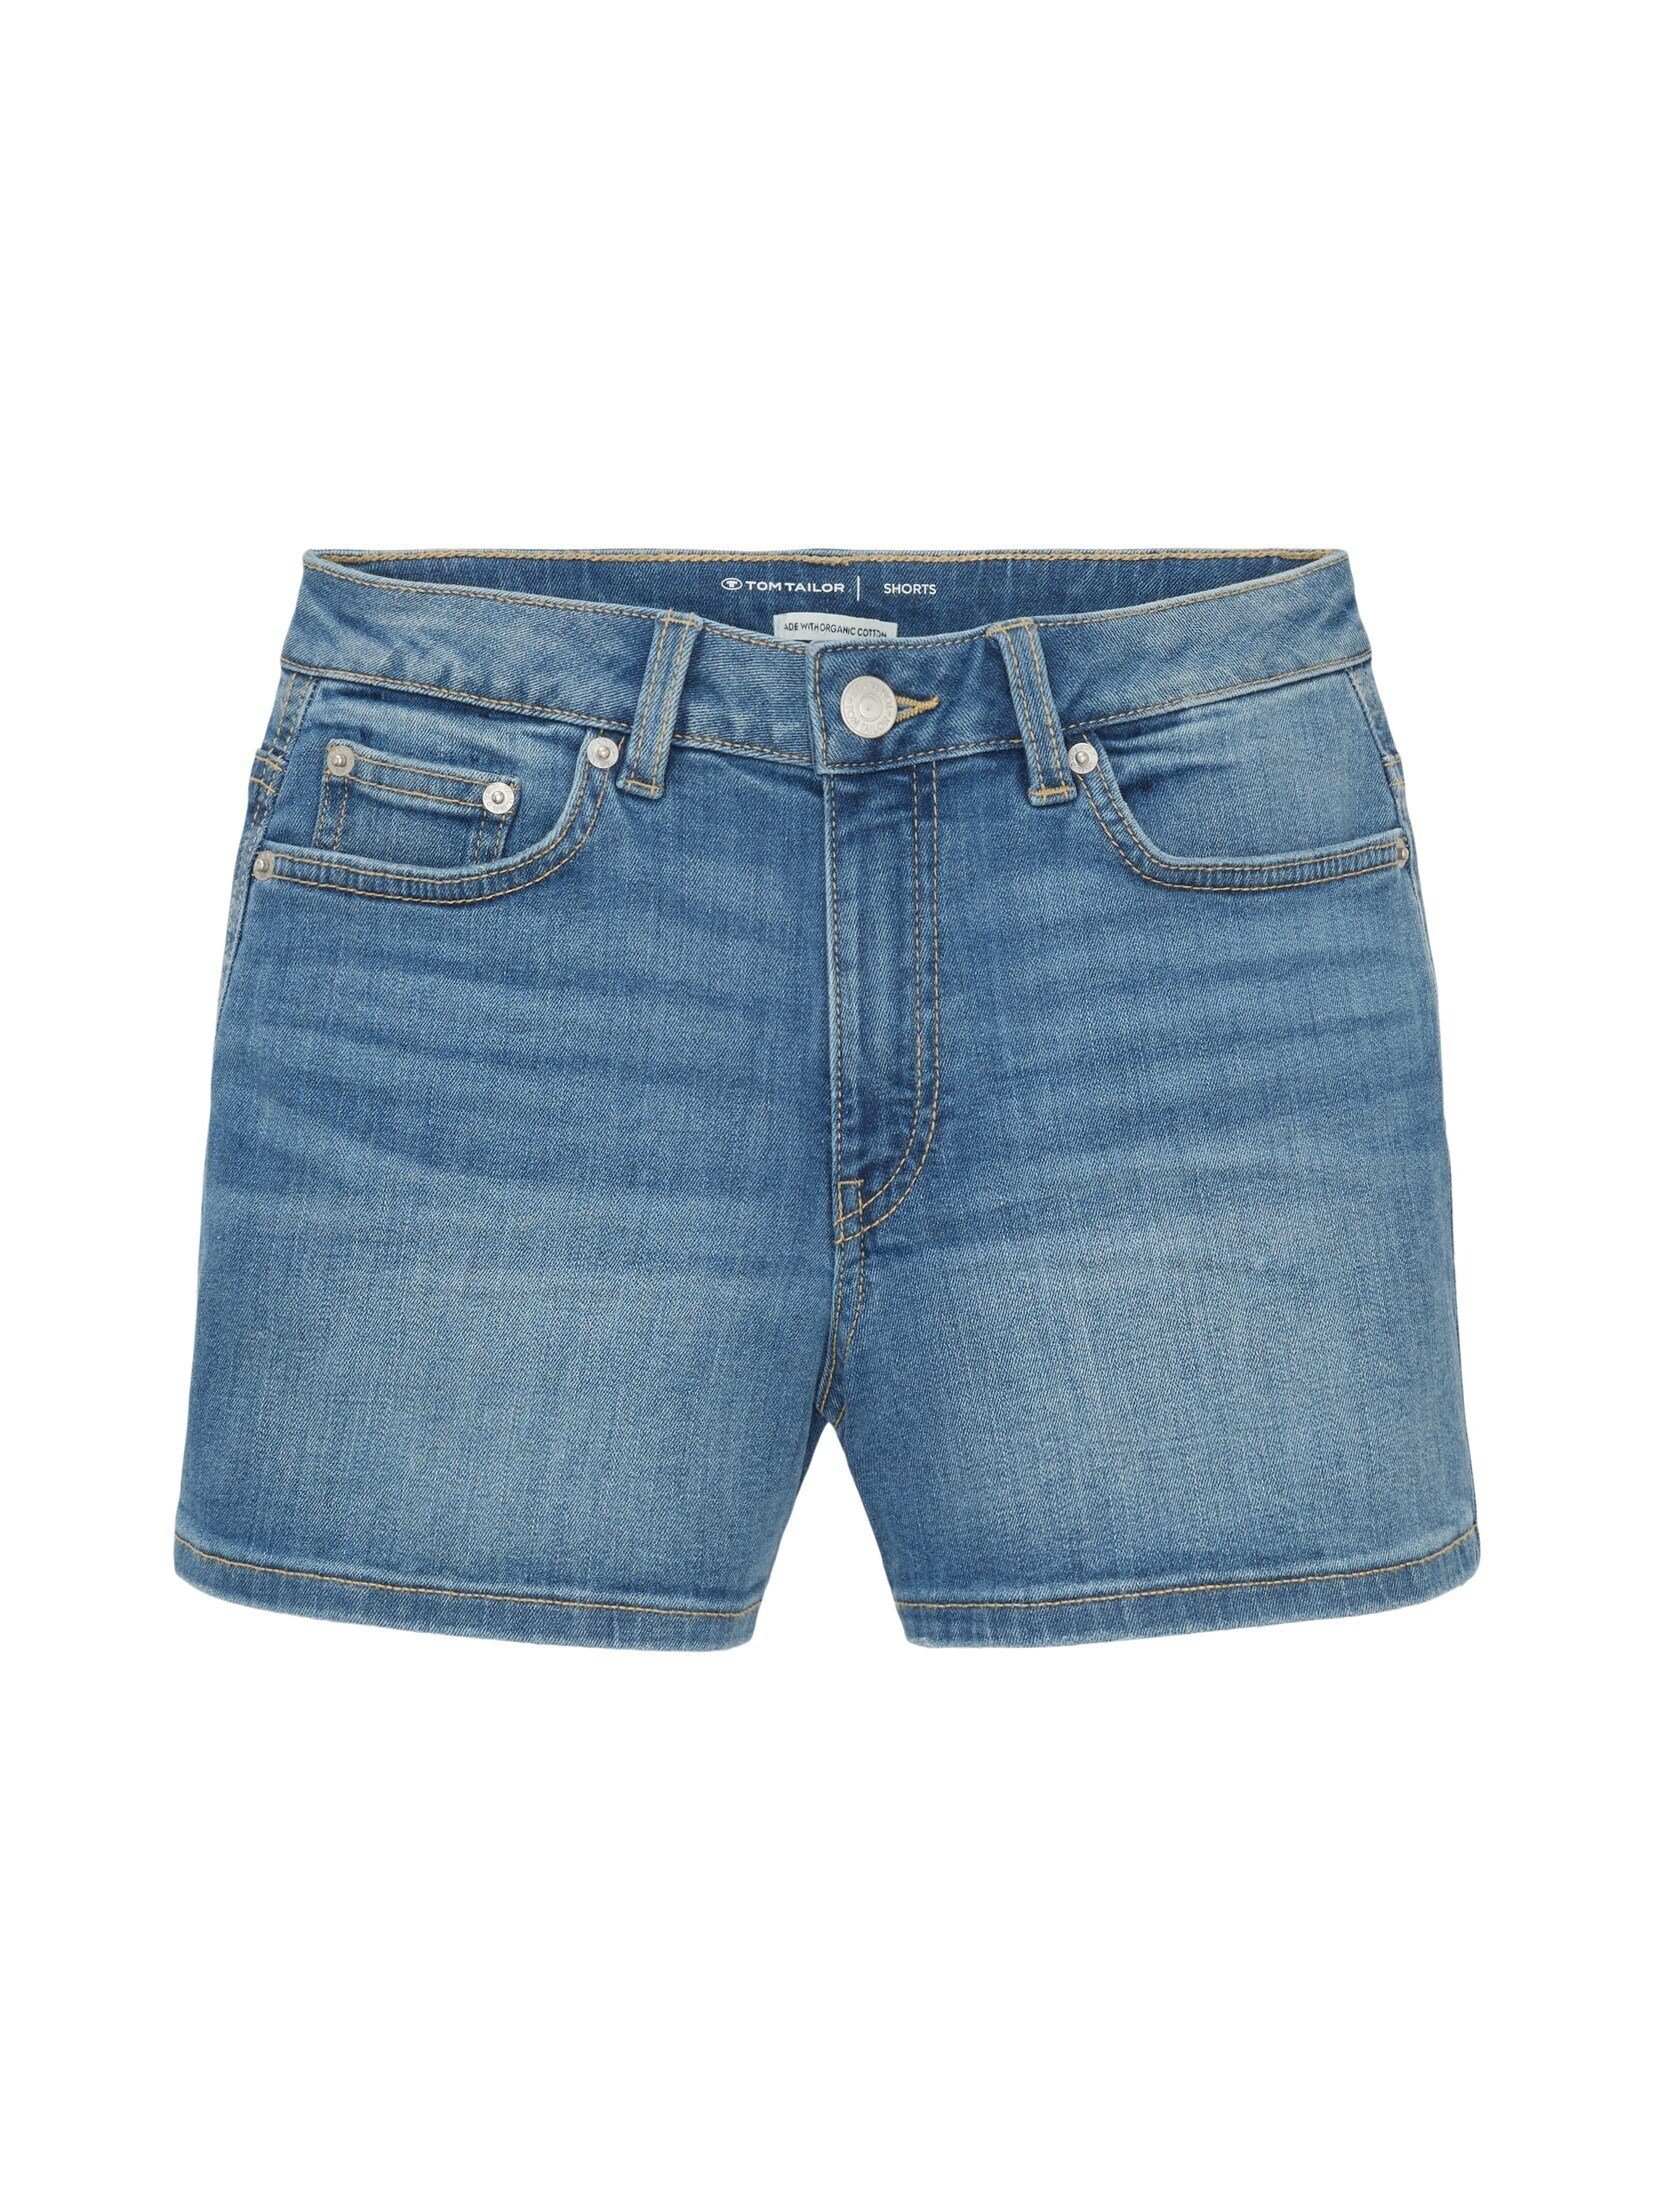 Waschung Jeansshorts mit Stone TOM Used TAILOR Jeansshorts leichter Mid Blue Denim